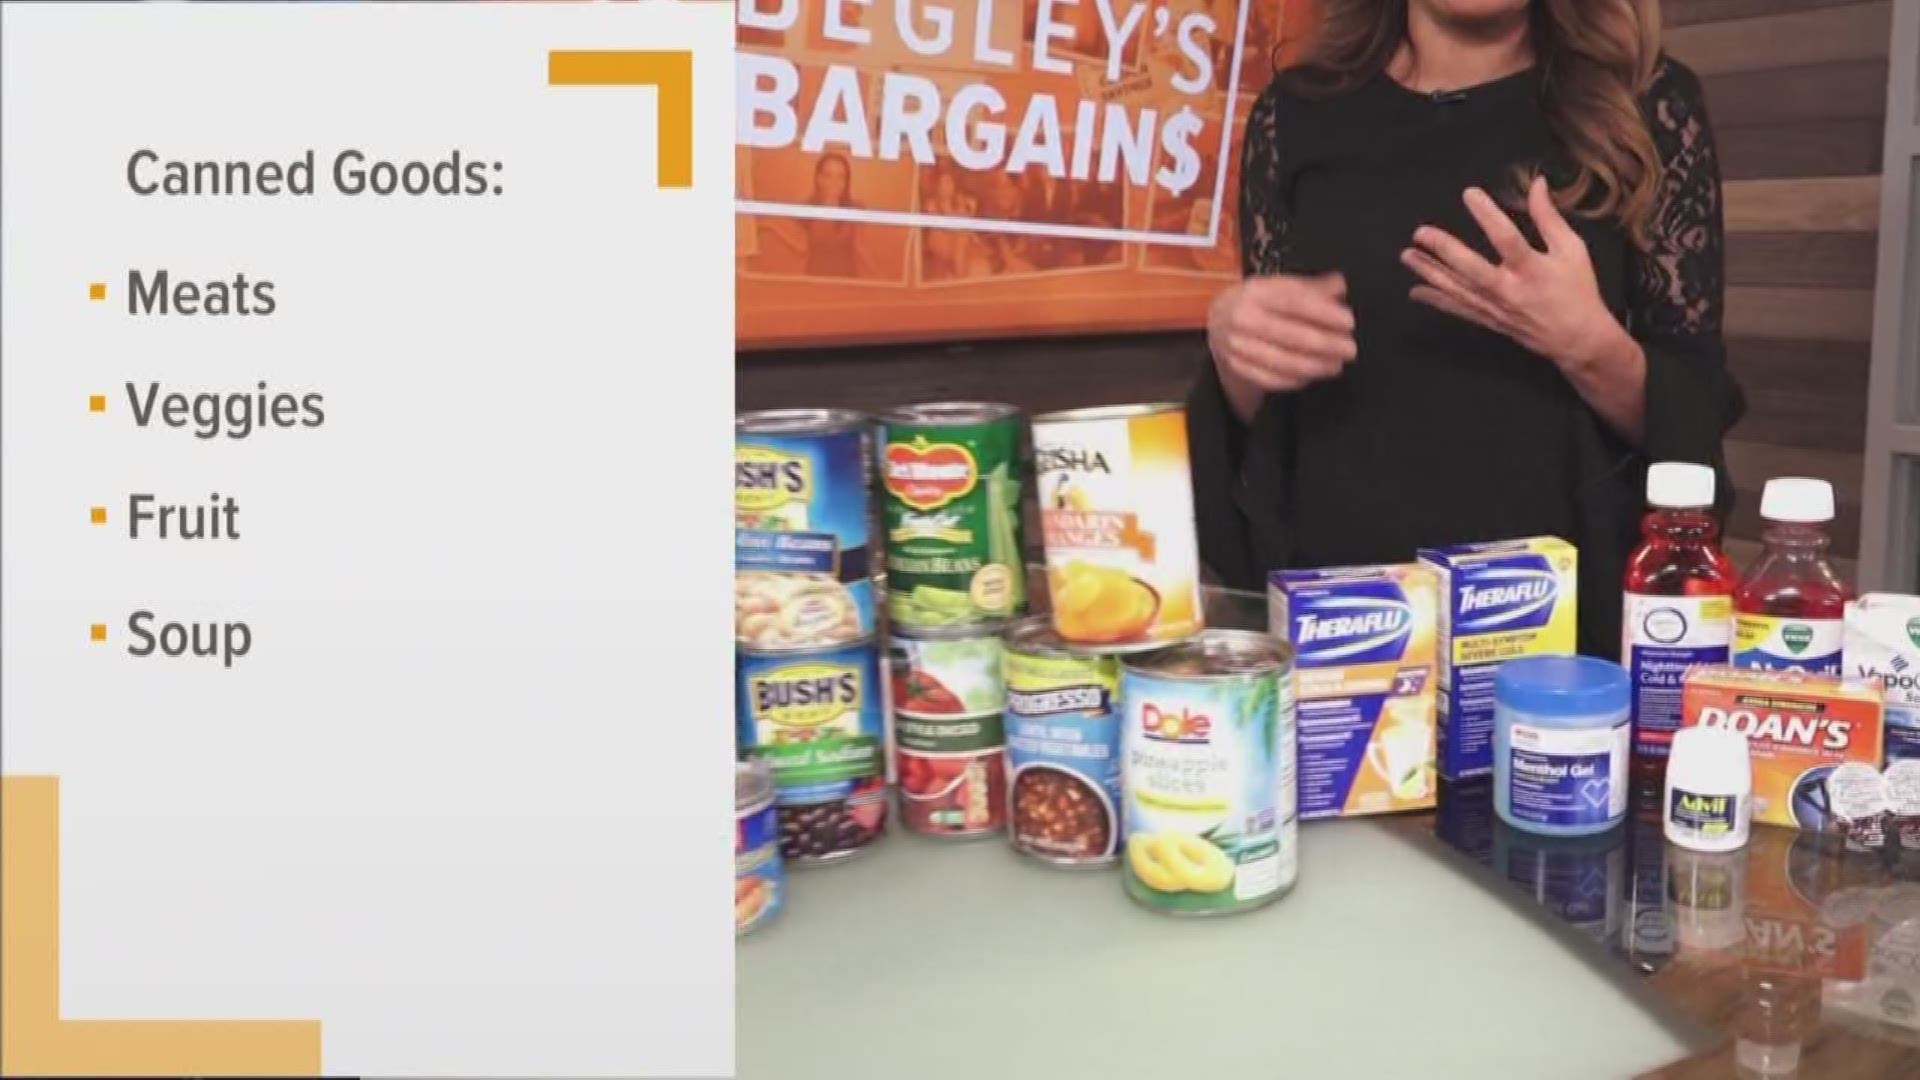 In this week's Begley's Bargains, Brittany shares some tips on how you can responsibly stock up on food and save some money while following stay-at-home orders.